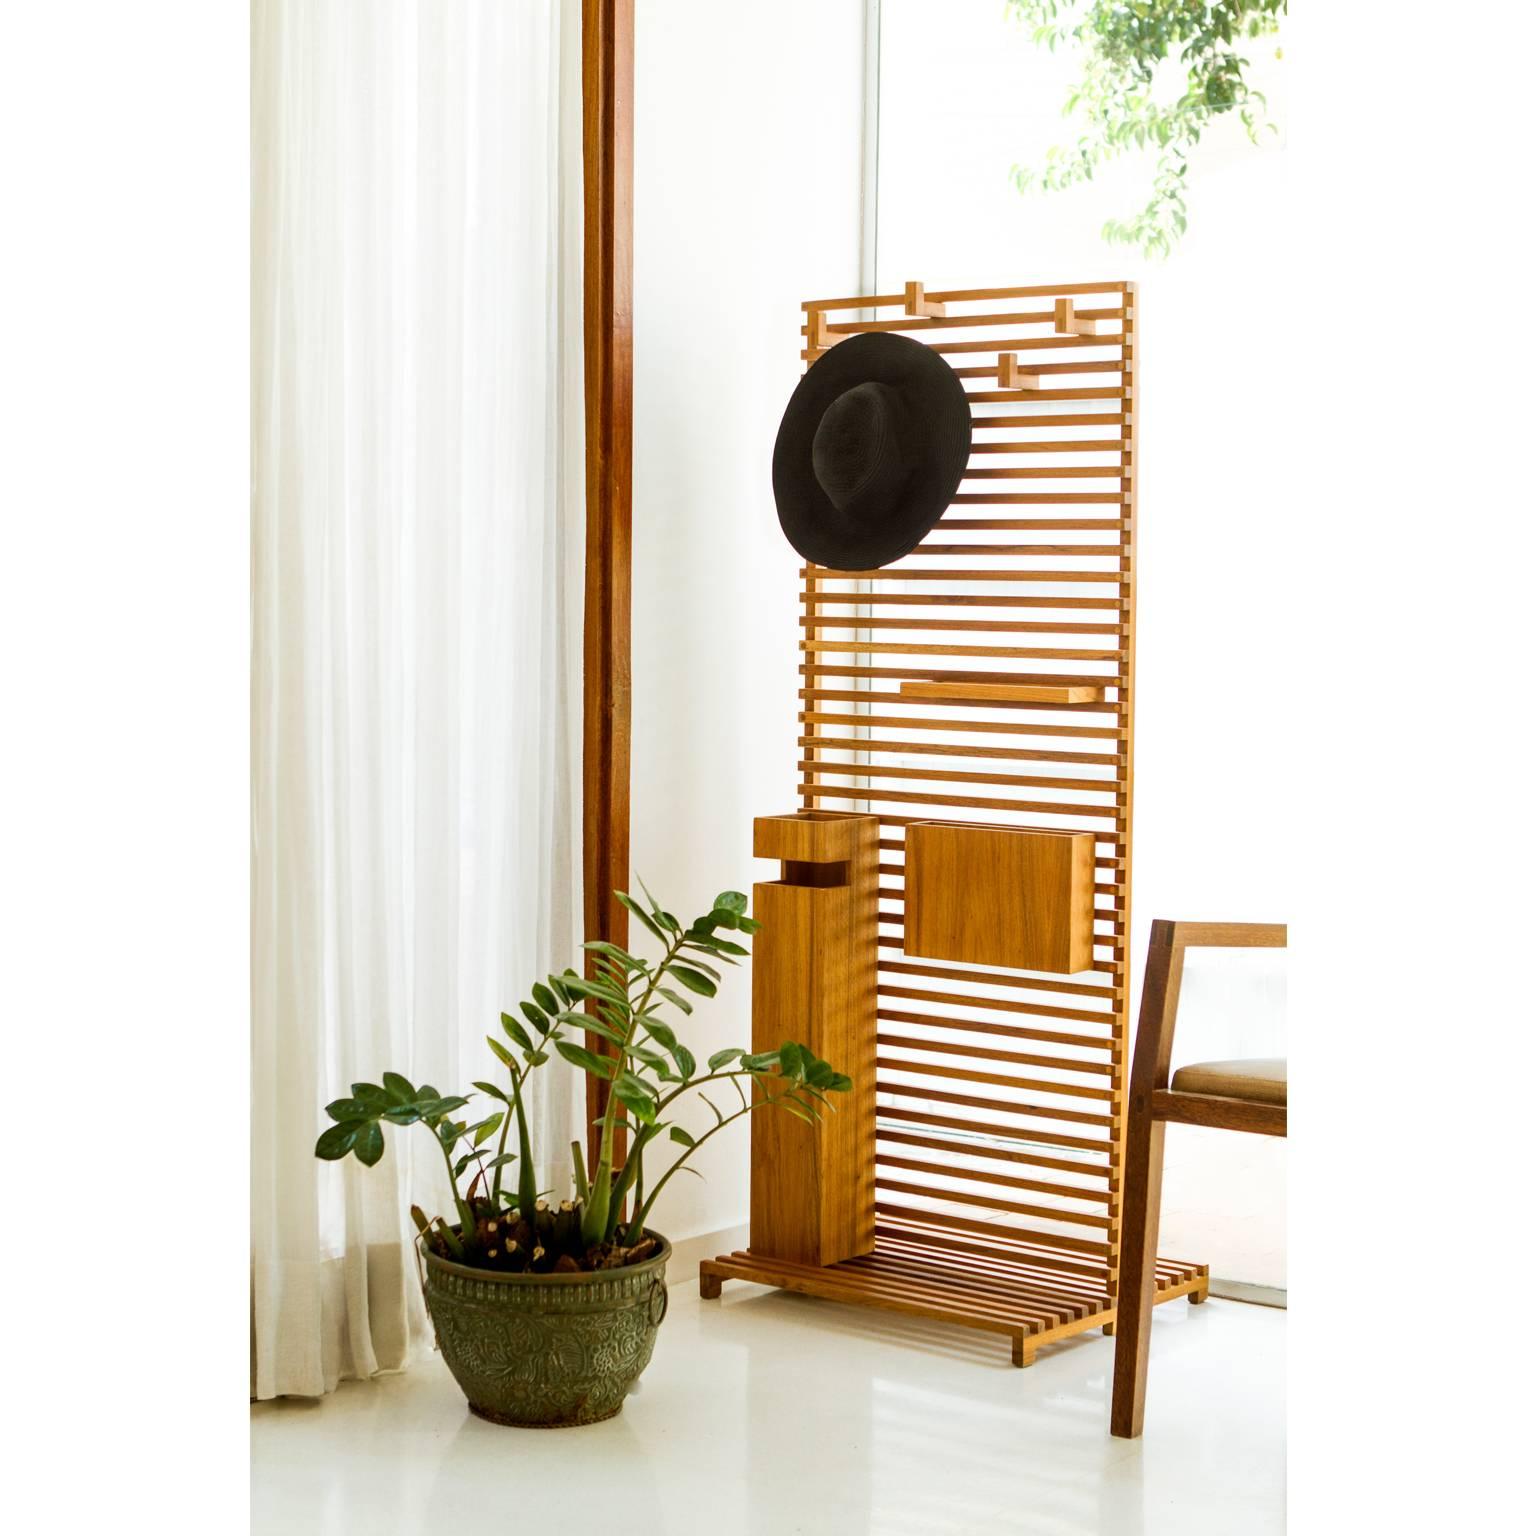 Made in solid brazilian wood Freijó with traditional joint techniques, the coat hanger Clau has hooks, support and niche for cards and umbrella. Can be used can be used in living rooms, receptions, entrance hall and bedrooms. The finishing is in an